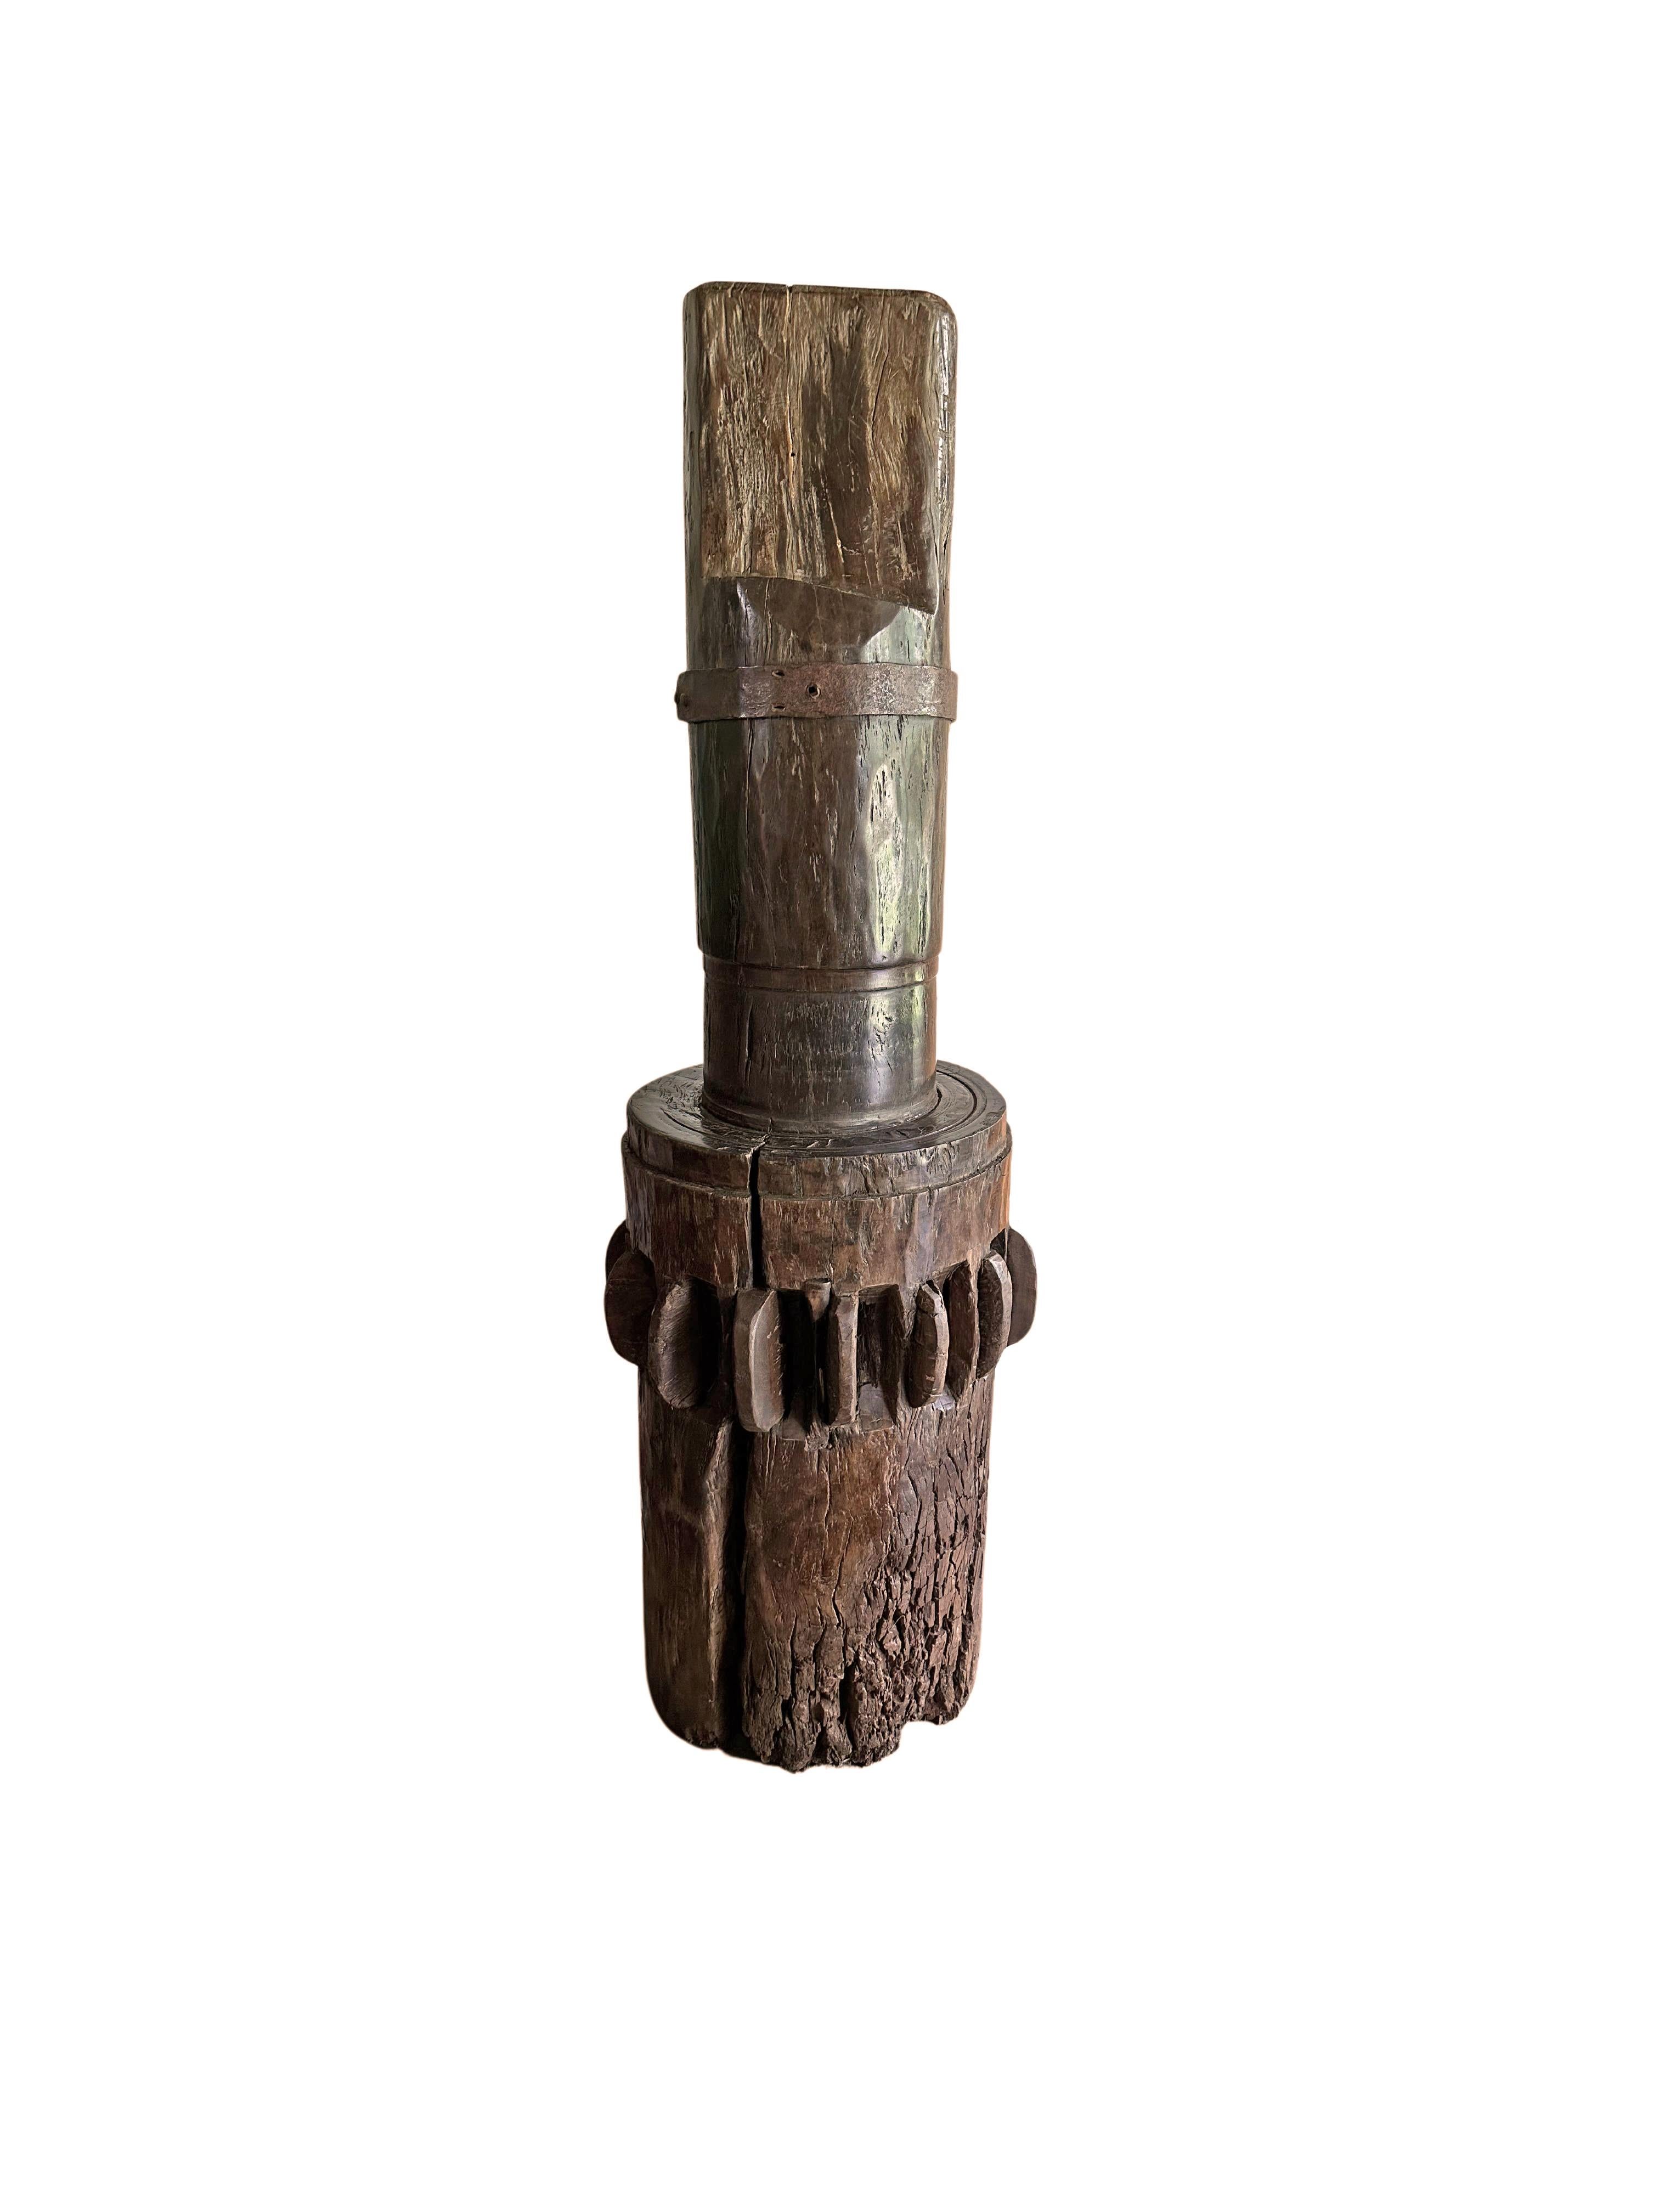 Indonesian Solid Teak Sugar Cane Mill Crusher / Grinder from Java, Indonesia, c. 1900 For Sale